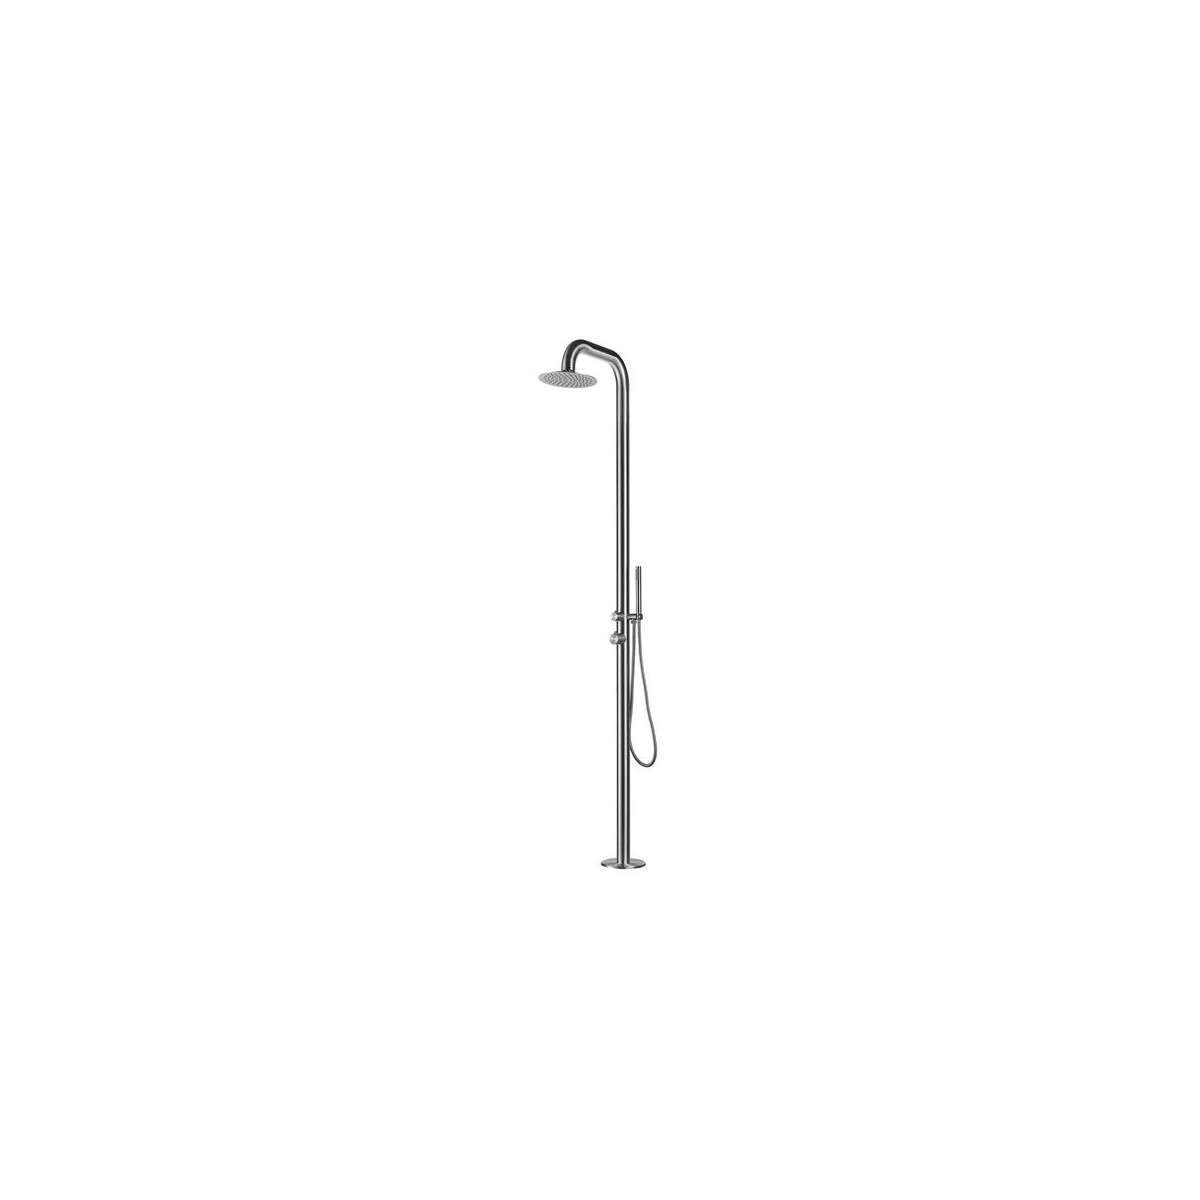 BuyOutdoor shower Pula in stain stainless AISI 316 with shower diameter 25cm and hand shower